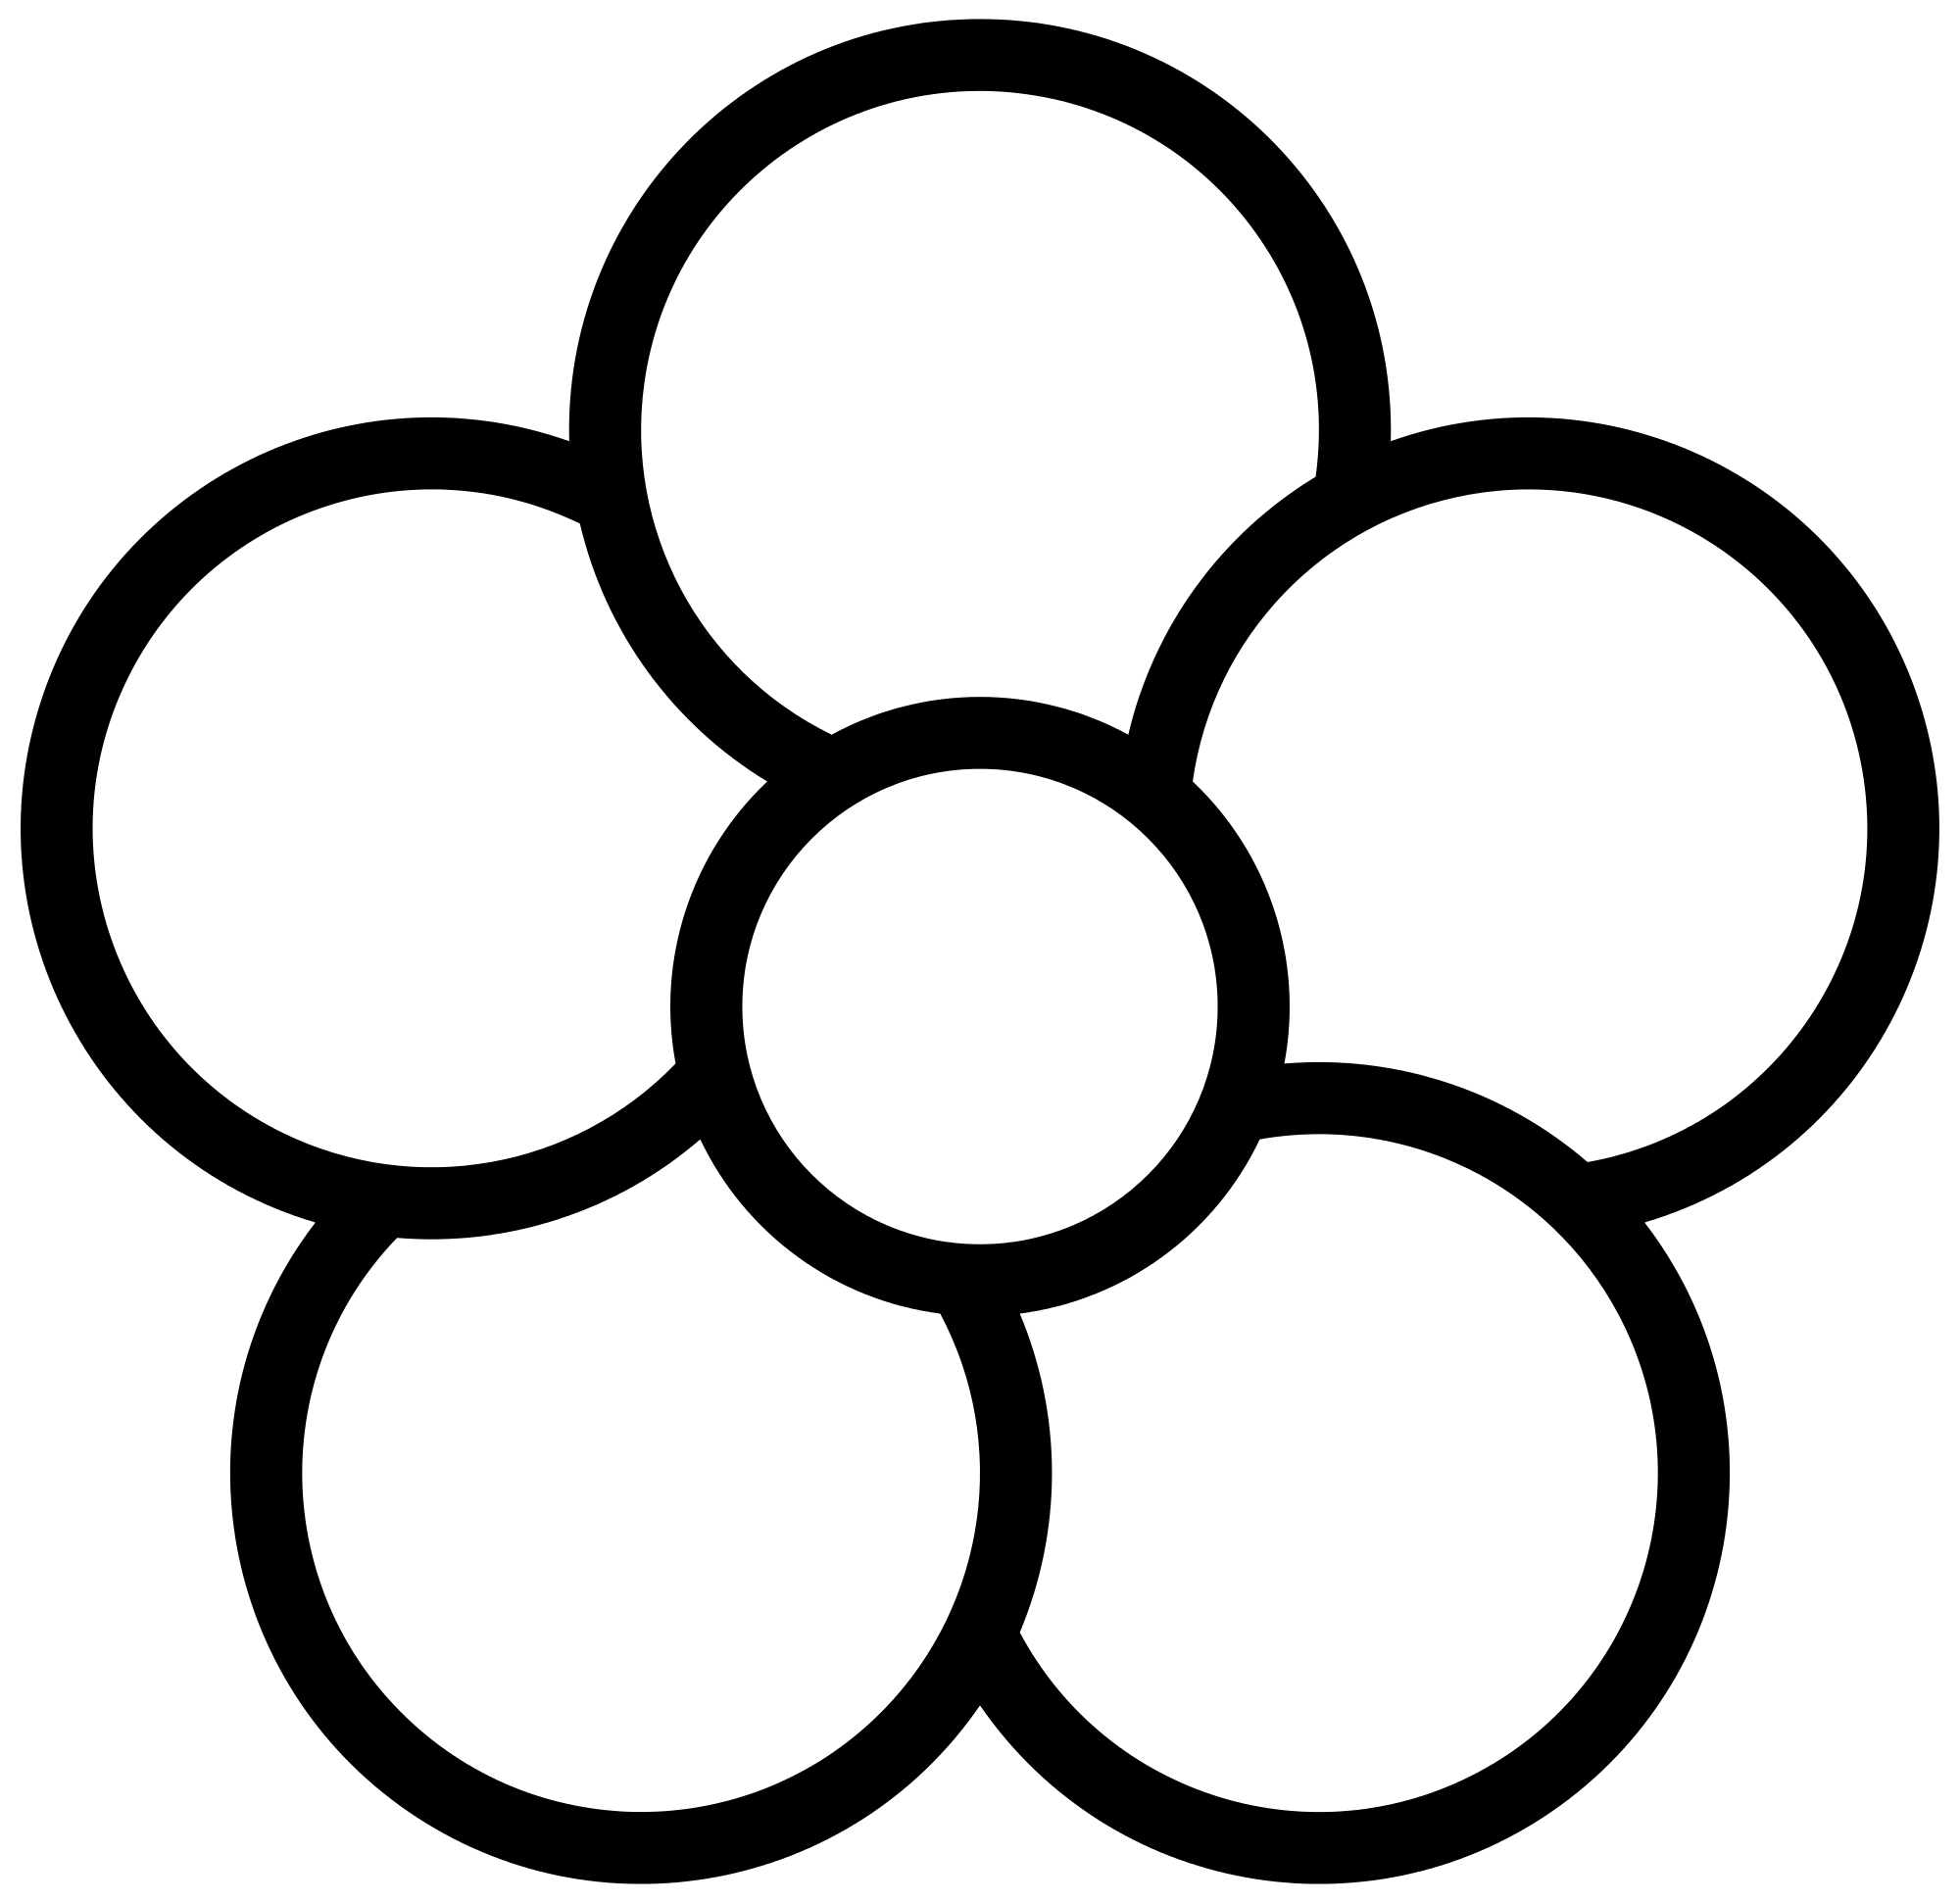 File:Five-petal flower icon.white.svg - Wikimedia Commons